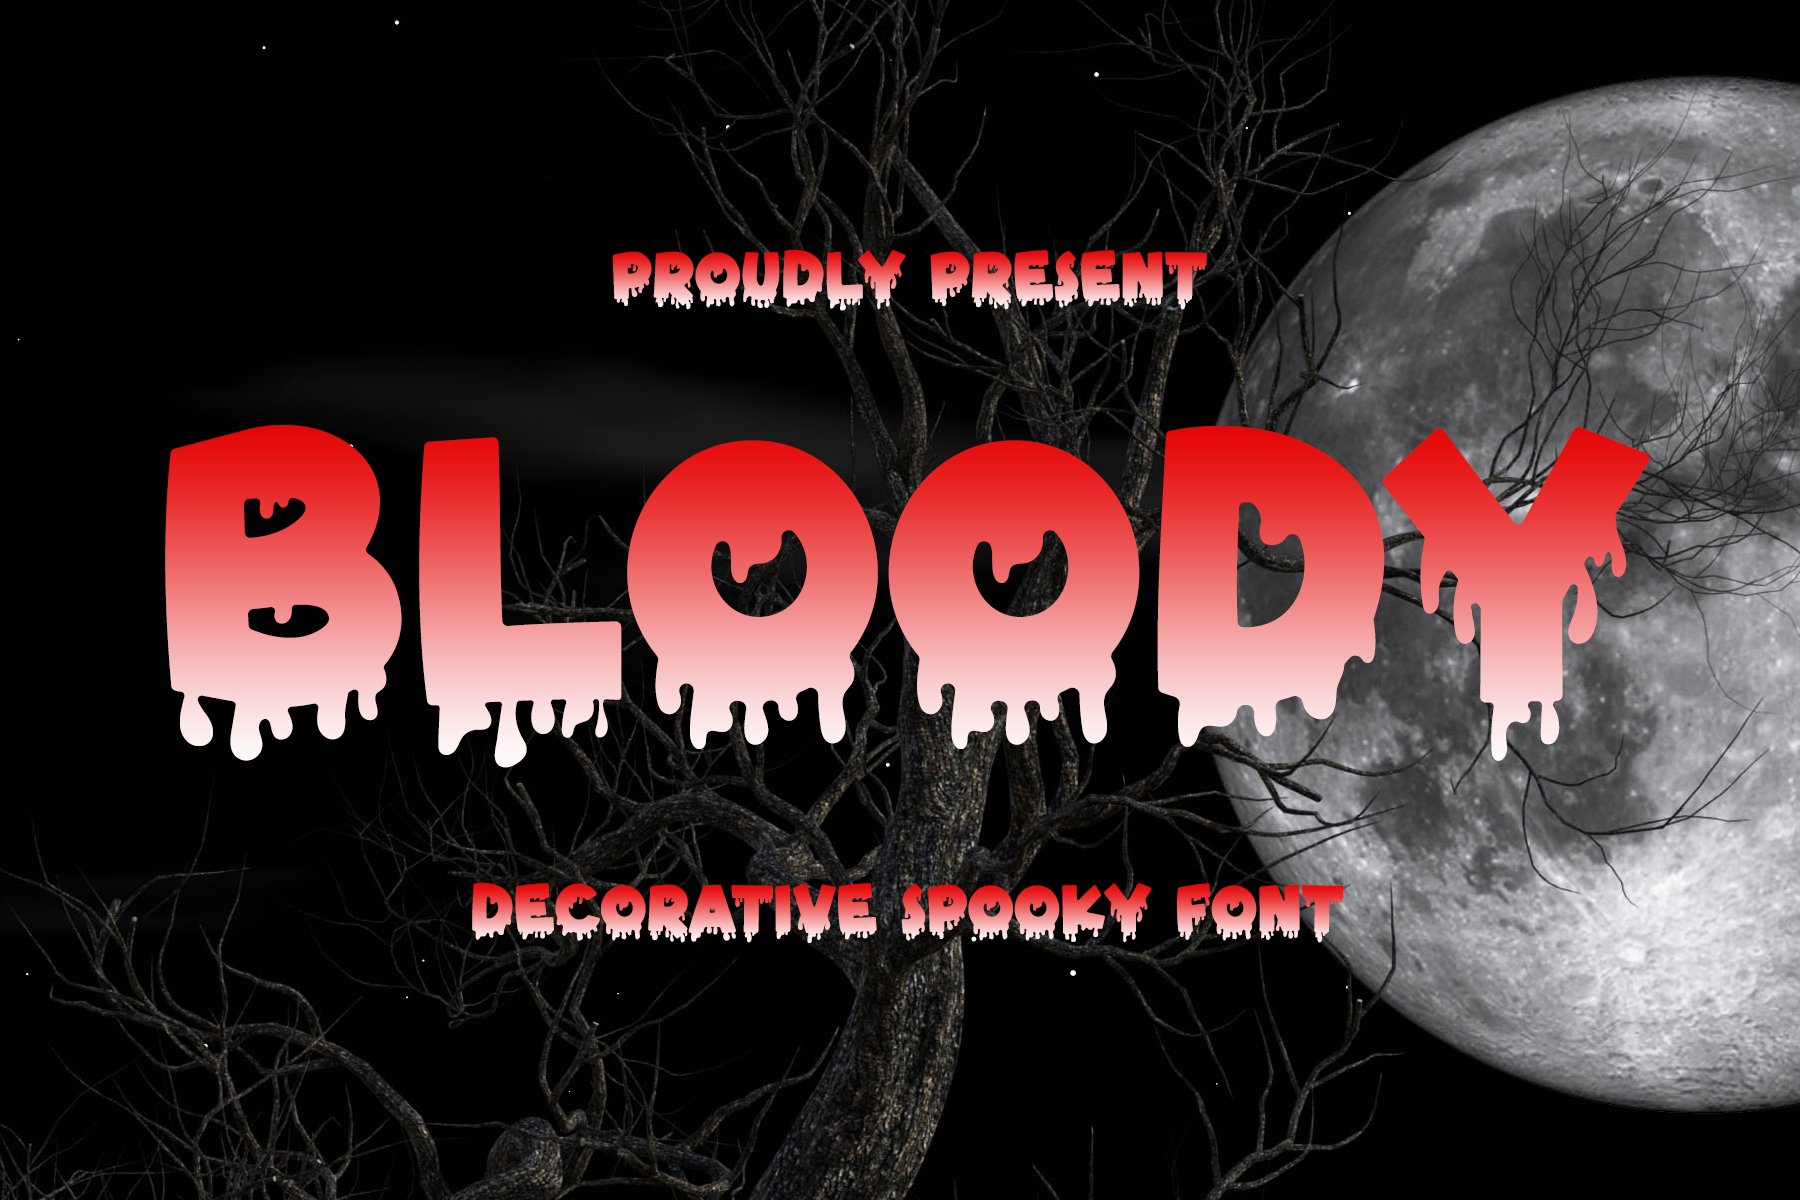 Bloody - Spooky Halloween Font cover image.